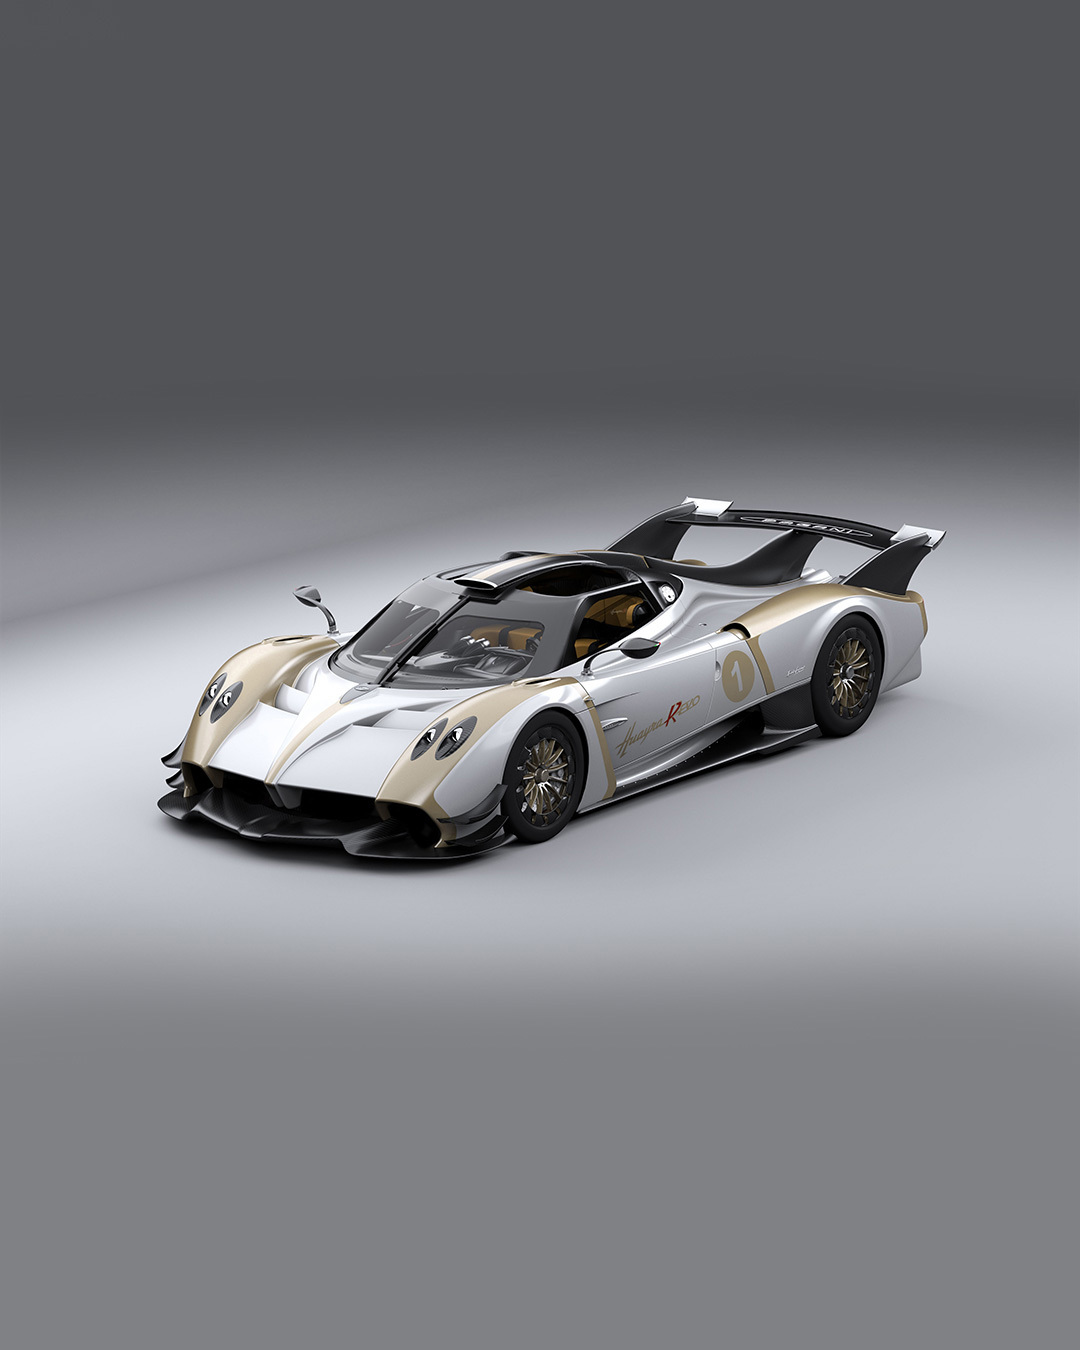 Pagani announces new track-based hypercar known as the Huayra R Evo